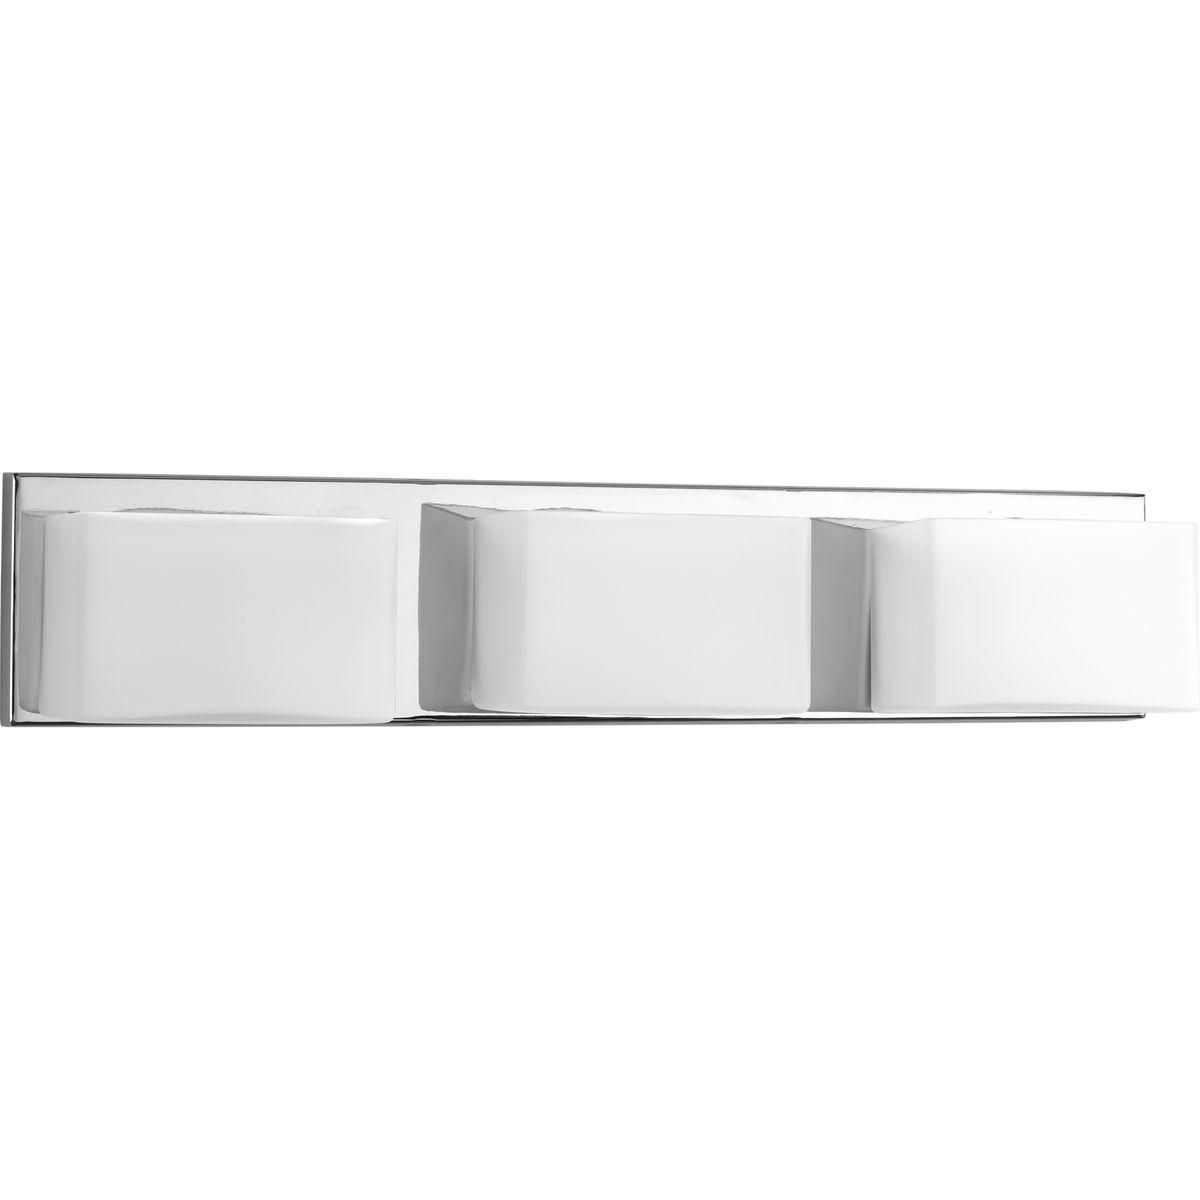 Hubbell P2144-1530K9 Three-Light LED modern wall fixture in Polished Chrome with geometric frosted glass shades and a replaceable LED module. This modern fixture is perfect for the bathroom. 3000K color temperature and 90 plus CRI.  ; Ideal for a bathroom ; Perfect for modern